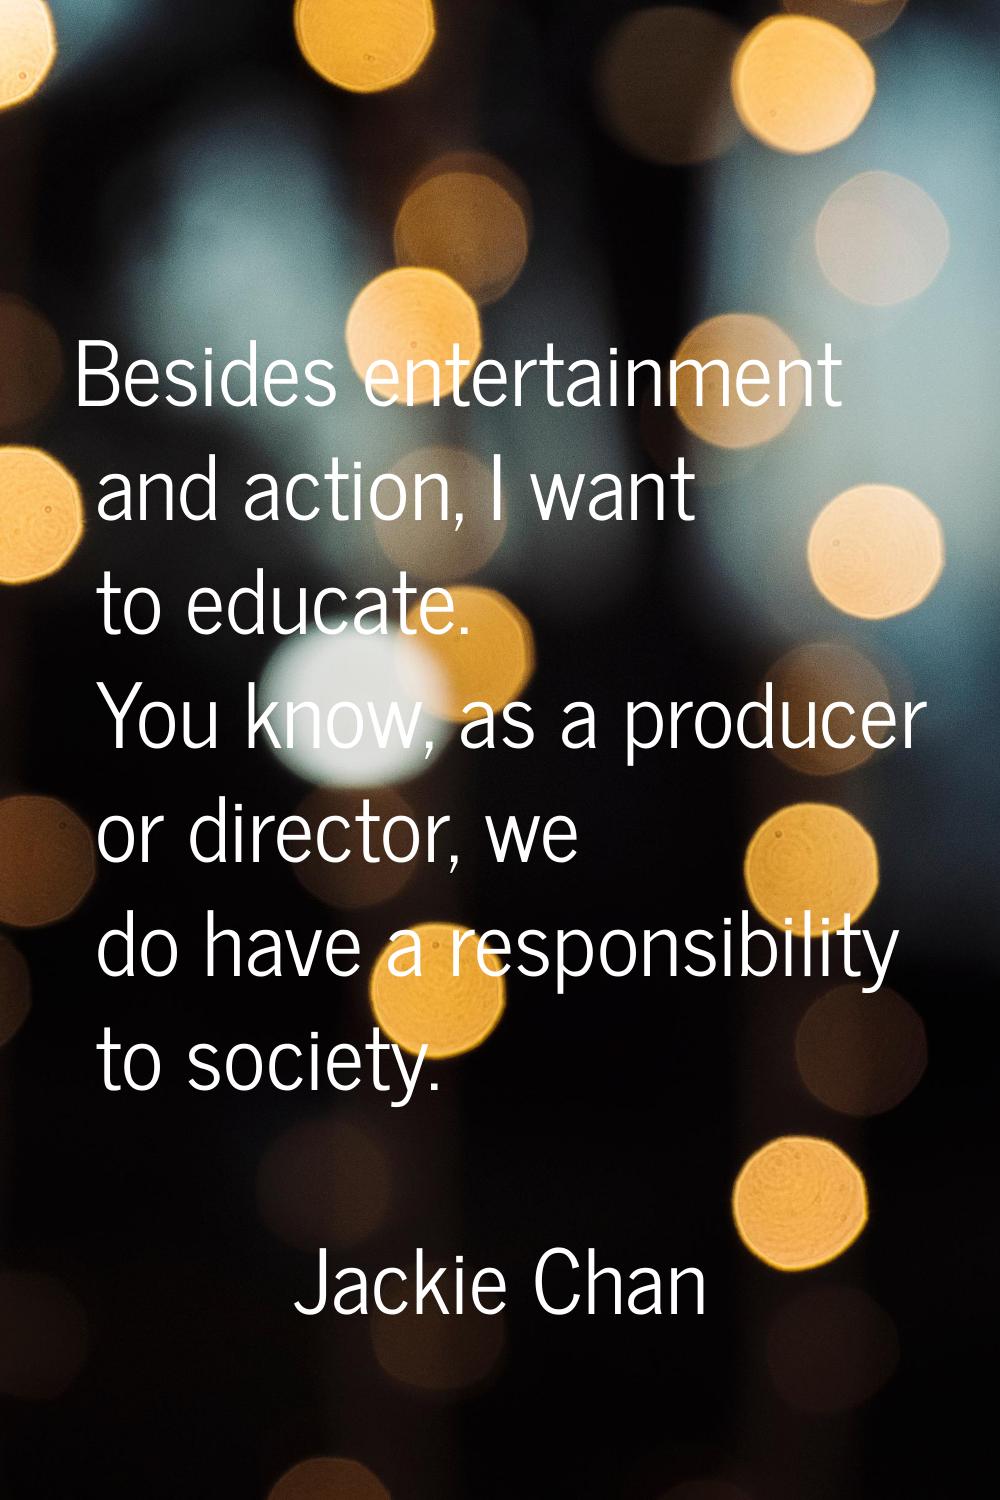 Besides entertainment and action, I want to educate. You know, as a producer or director, we do hav